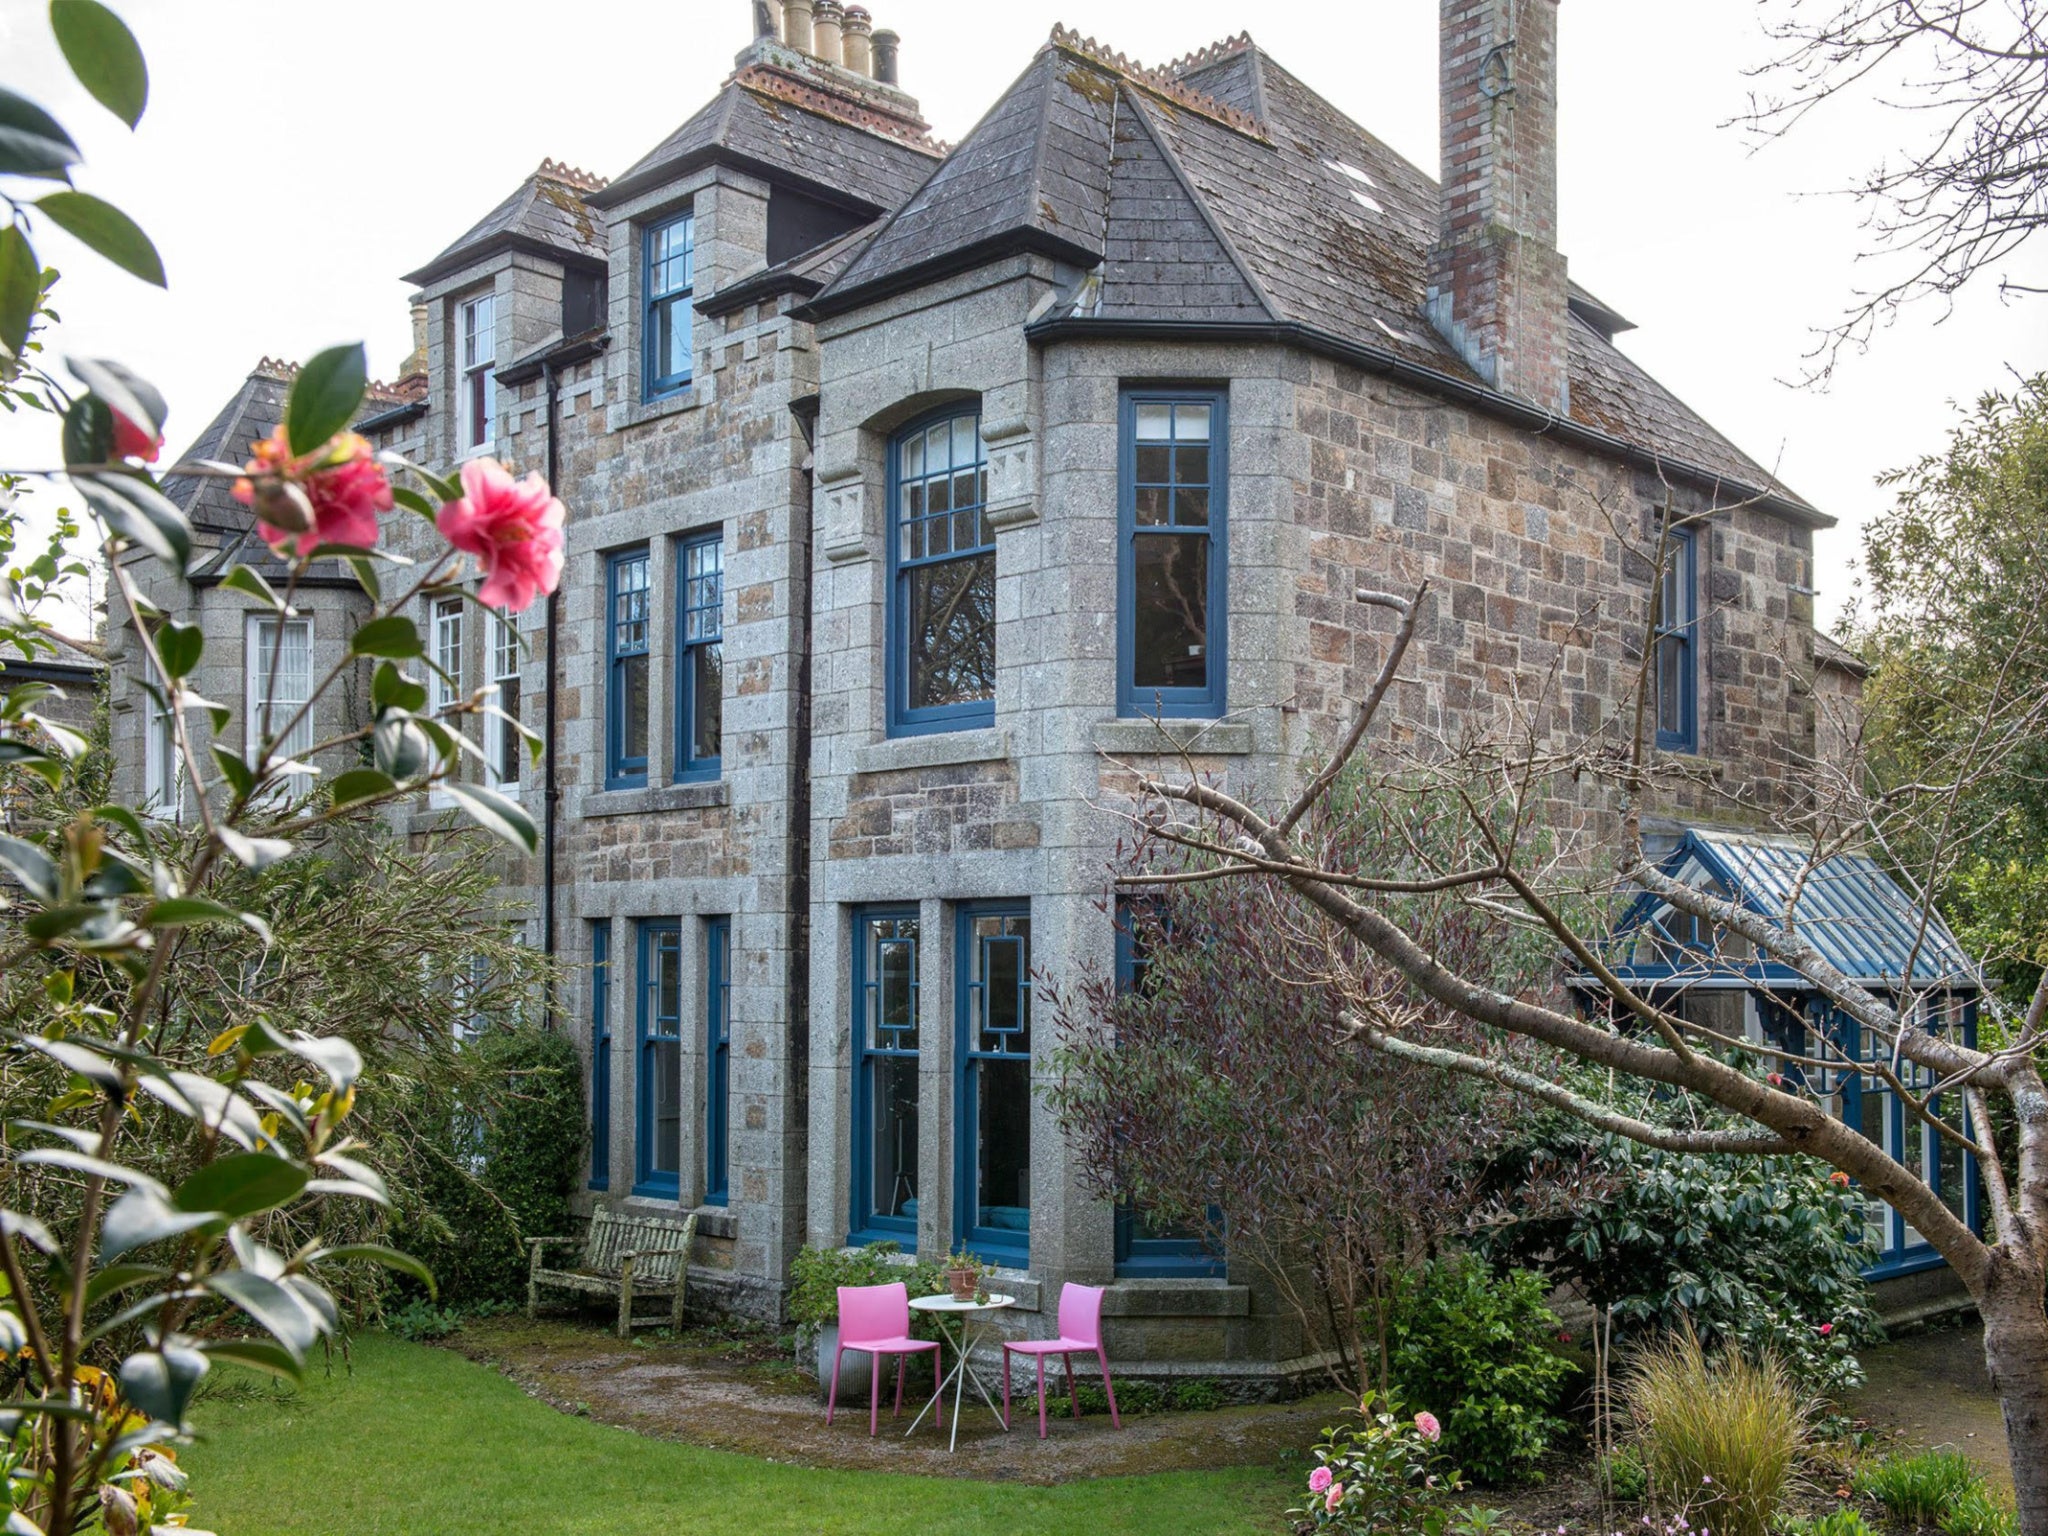 This smart Victorian villa offers one of the best breakfasts in Cornwall